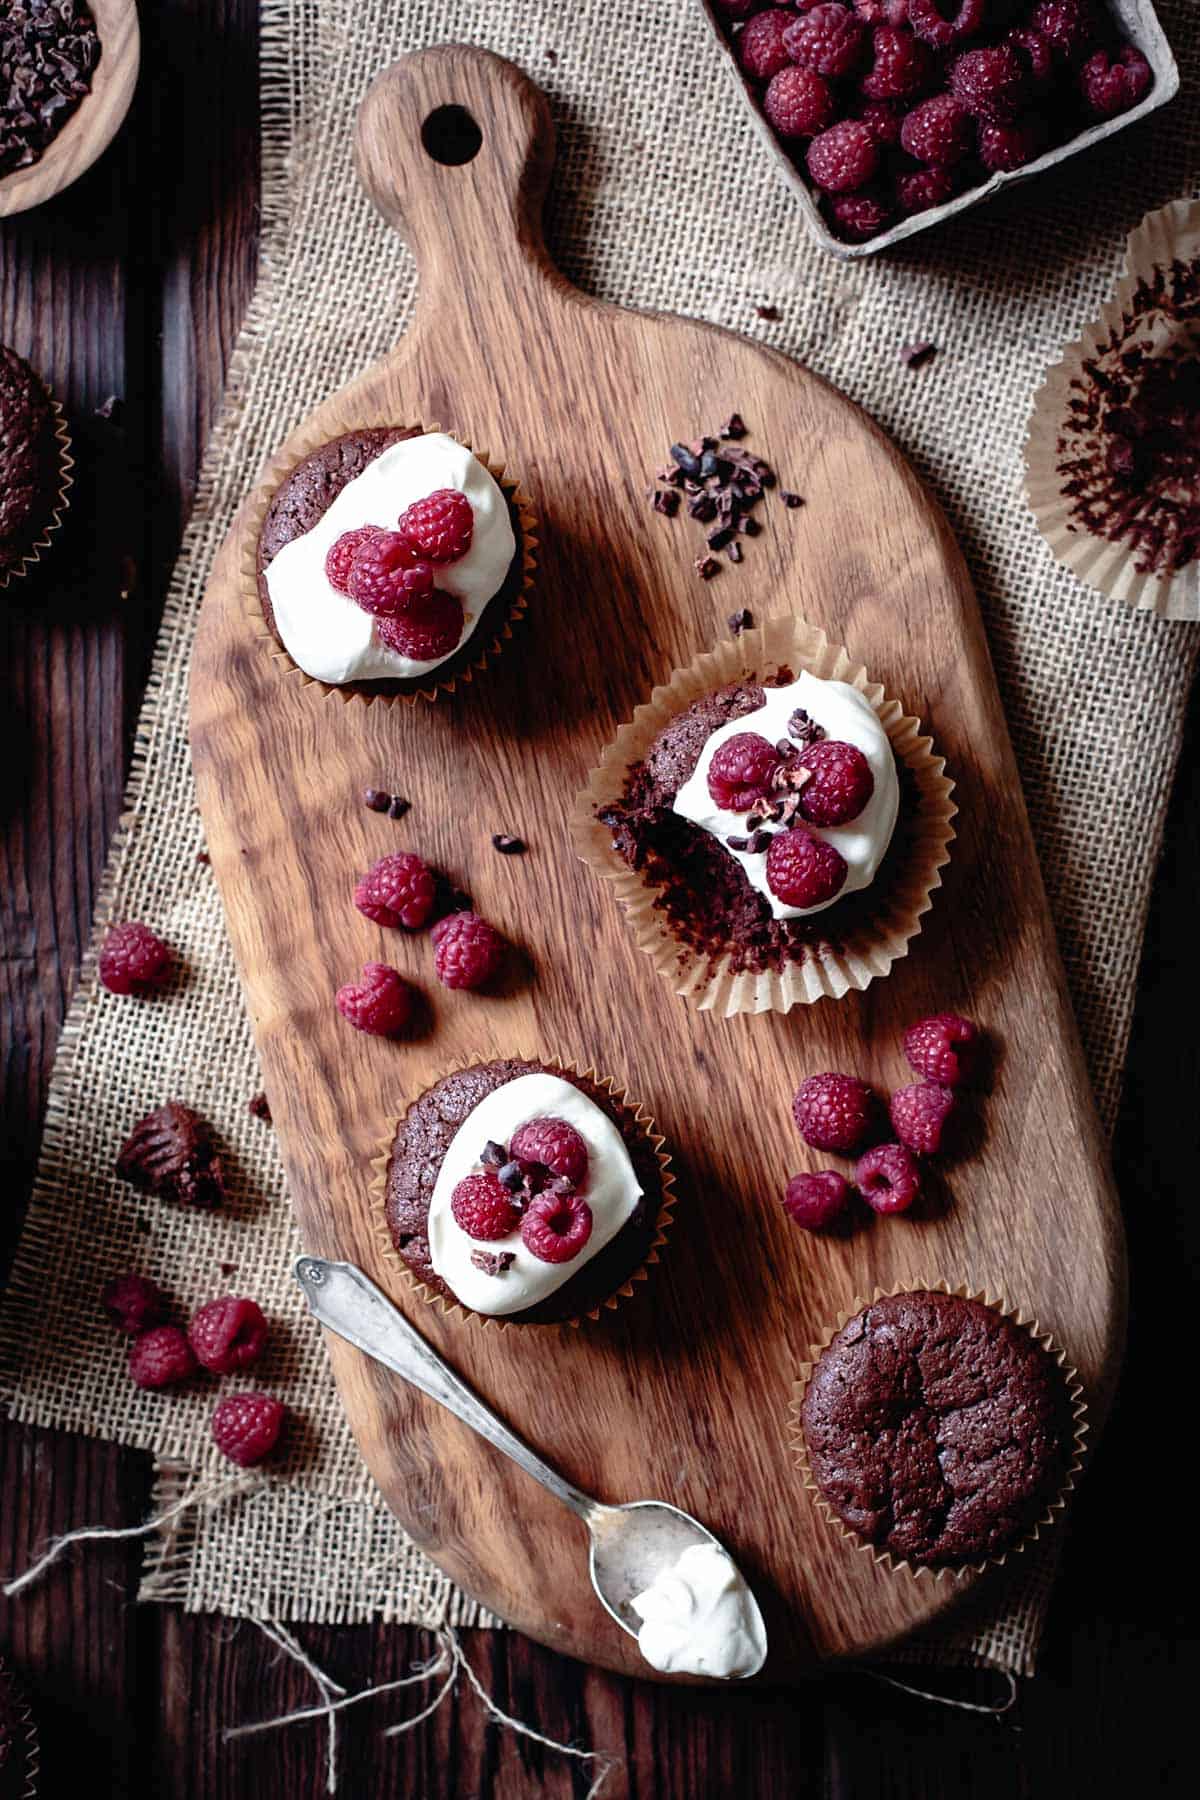 flourless desserts: mini flourless chocolate cakes with berries and cream